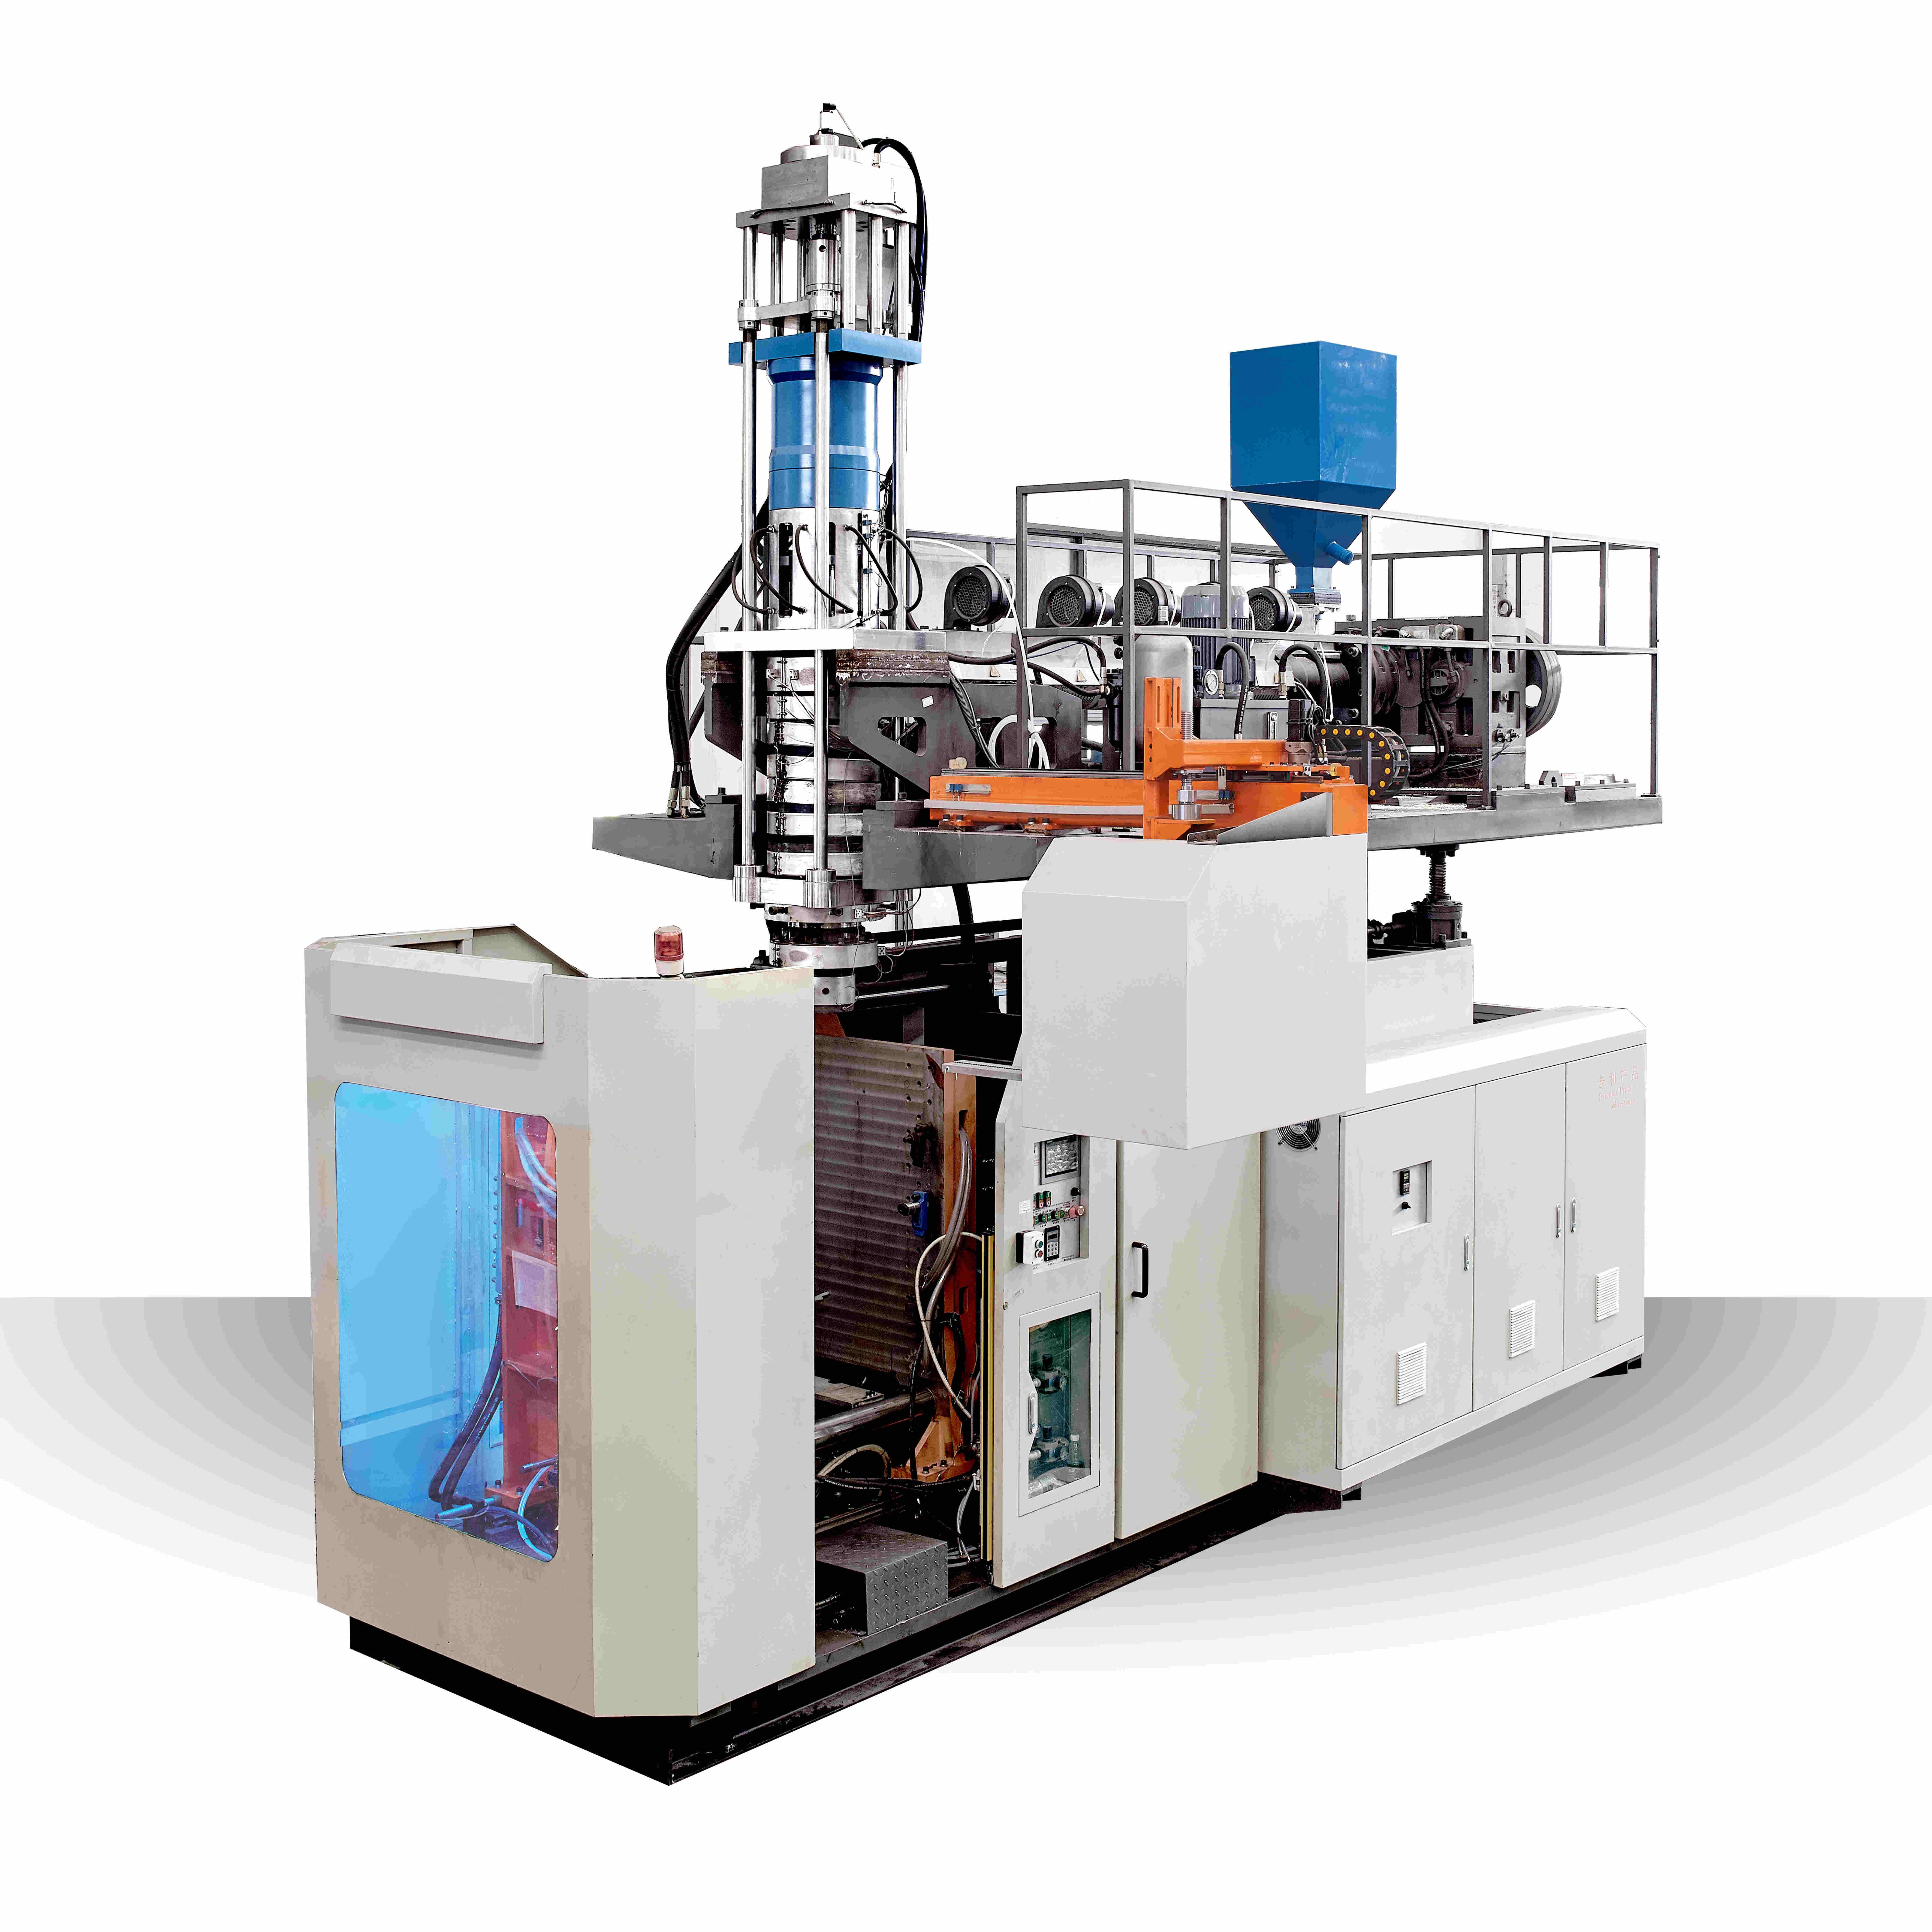 What waste materials will be generated during the production process of china hdpe bottle blow molding machine?